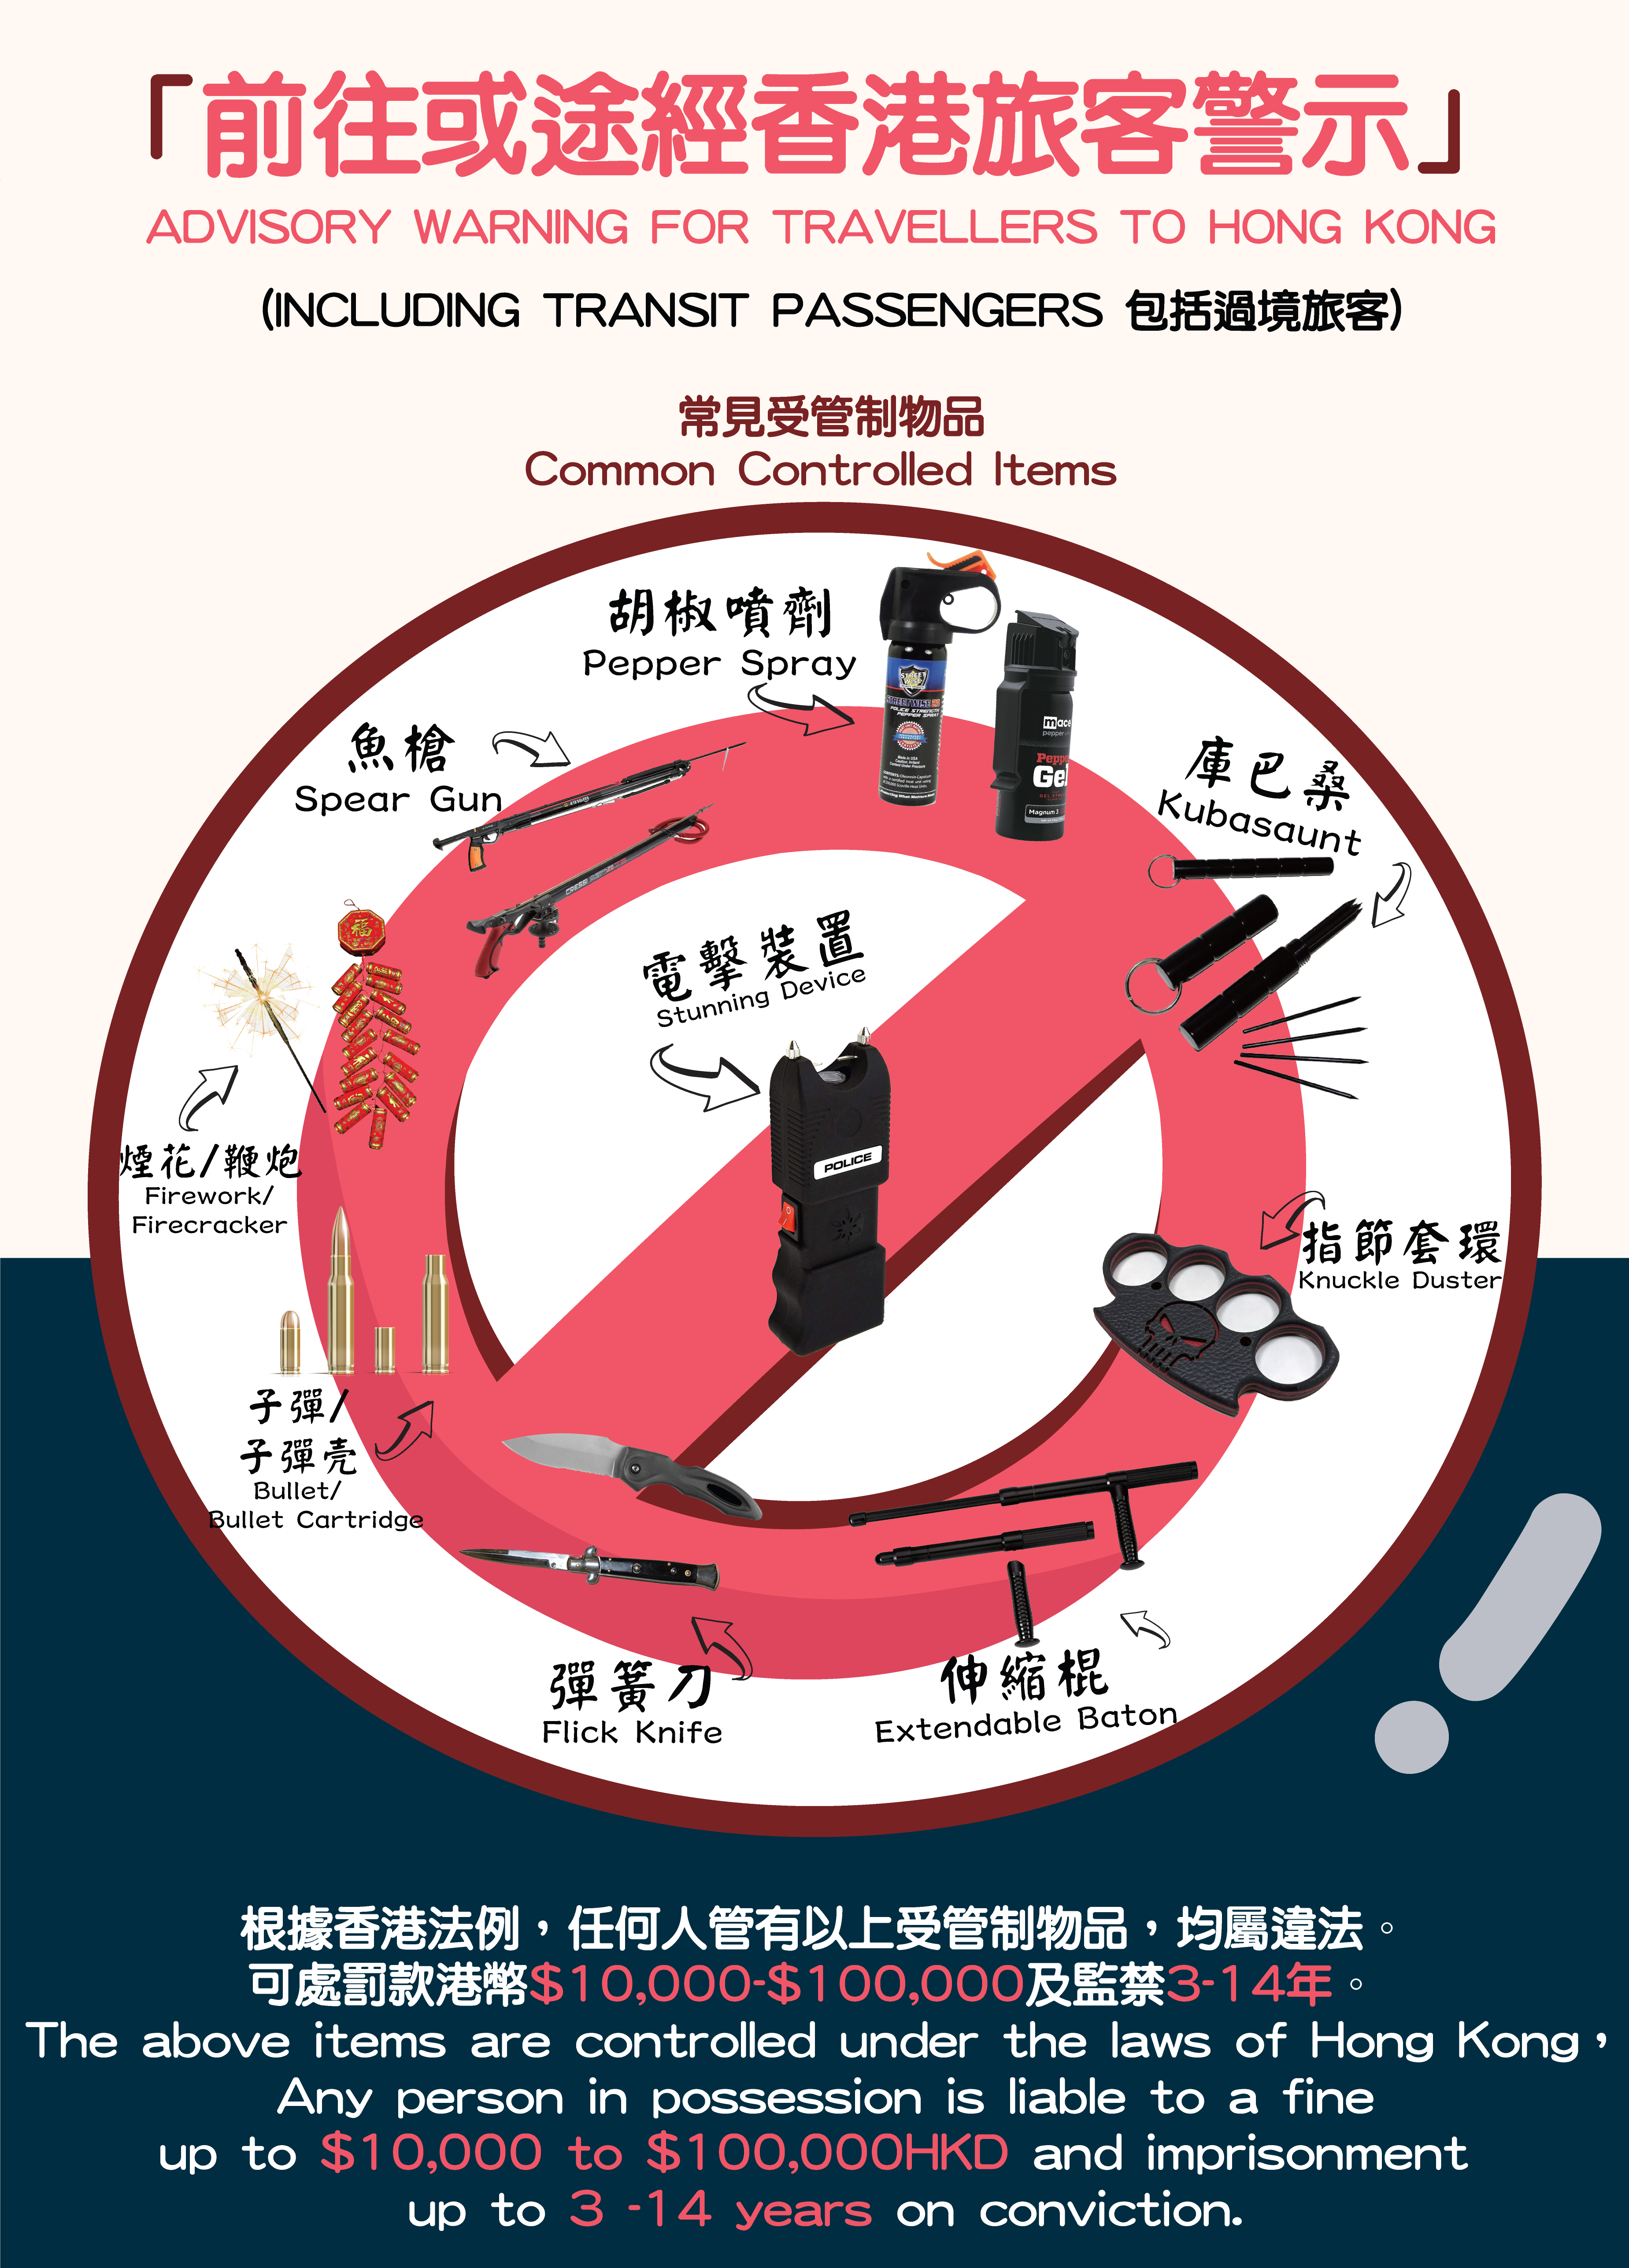 Do not carry restricted items in Hong Kong